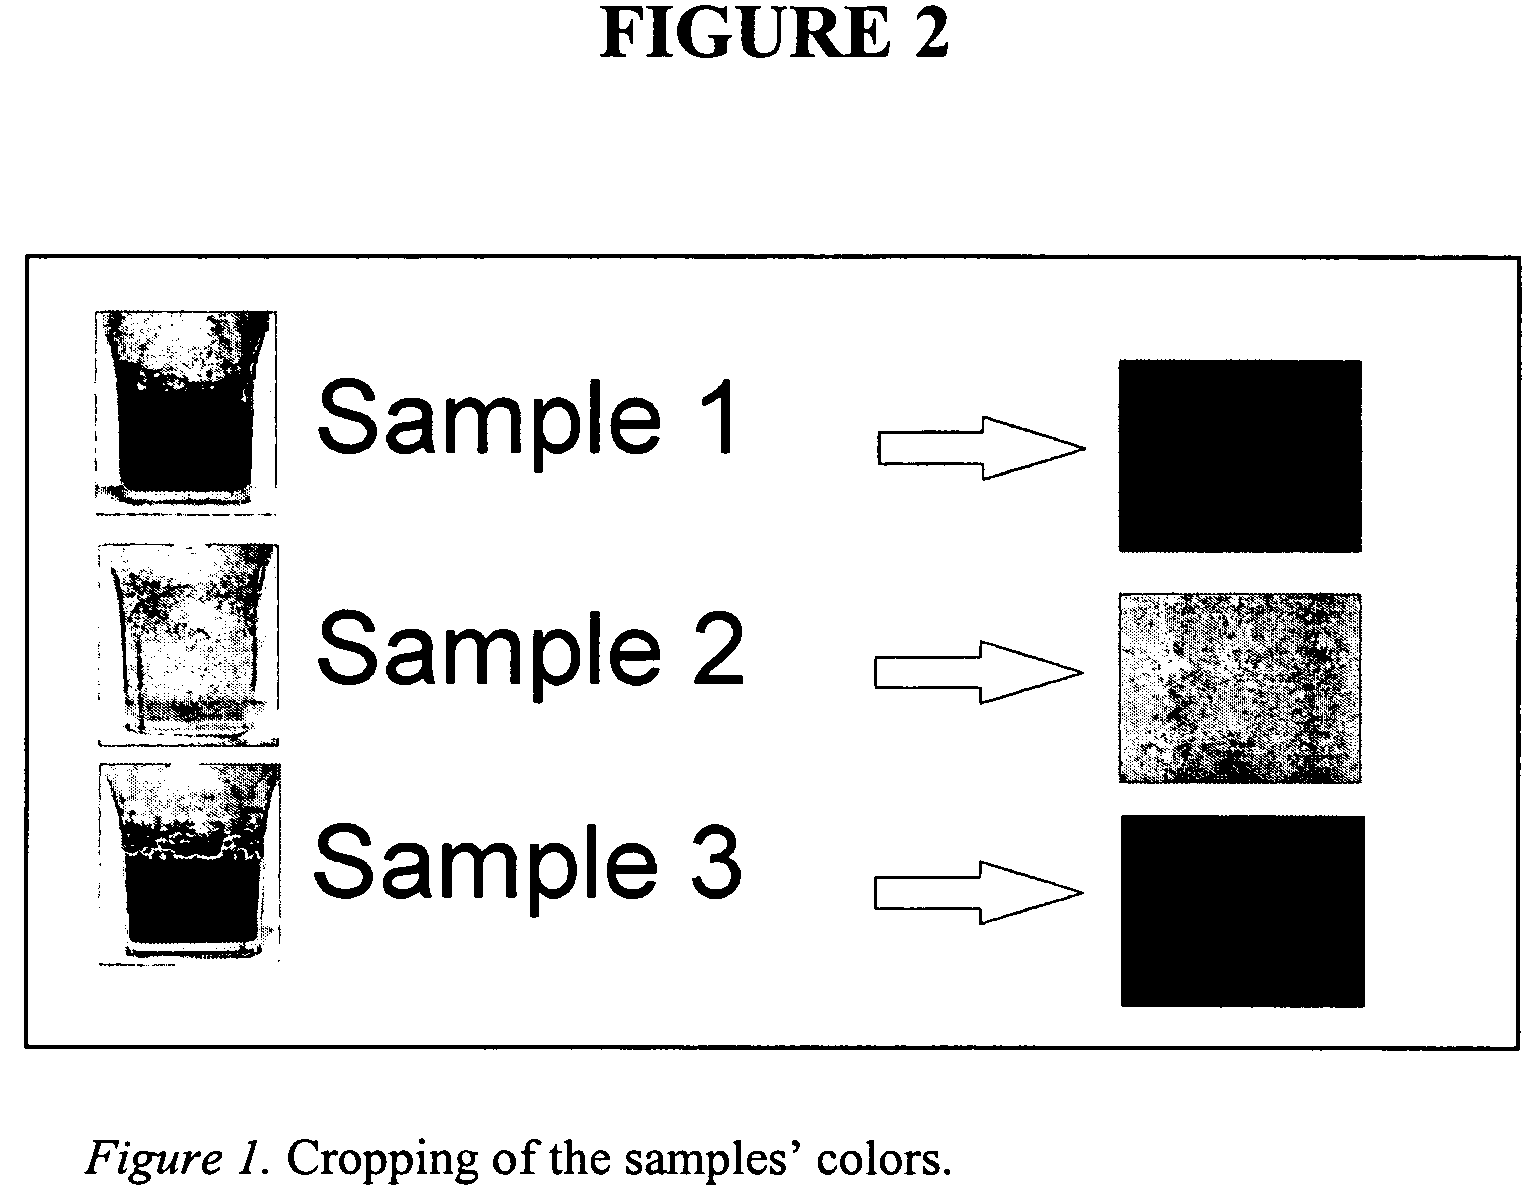 Method for non-invasive rinse diagnosis and monitoring of periodontal diseases using colourimetric reagents